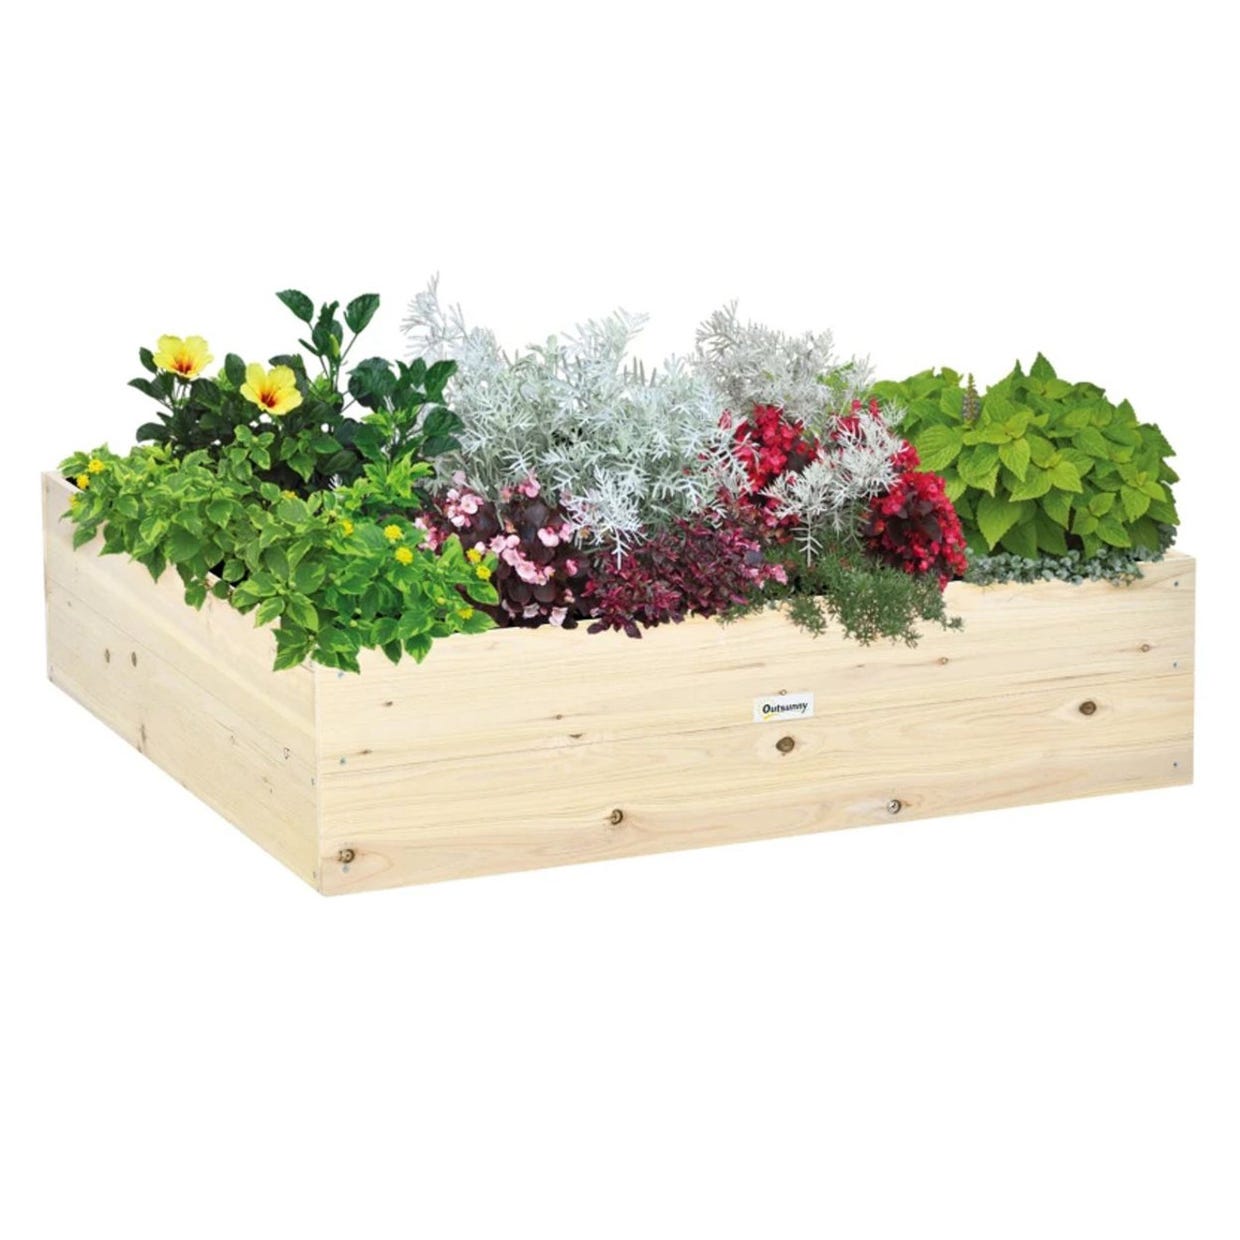 Rectangular wooden planter box filled with various colorful flowers and plants.